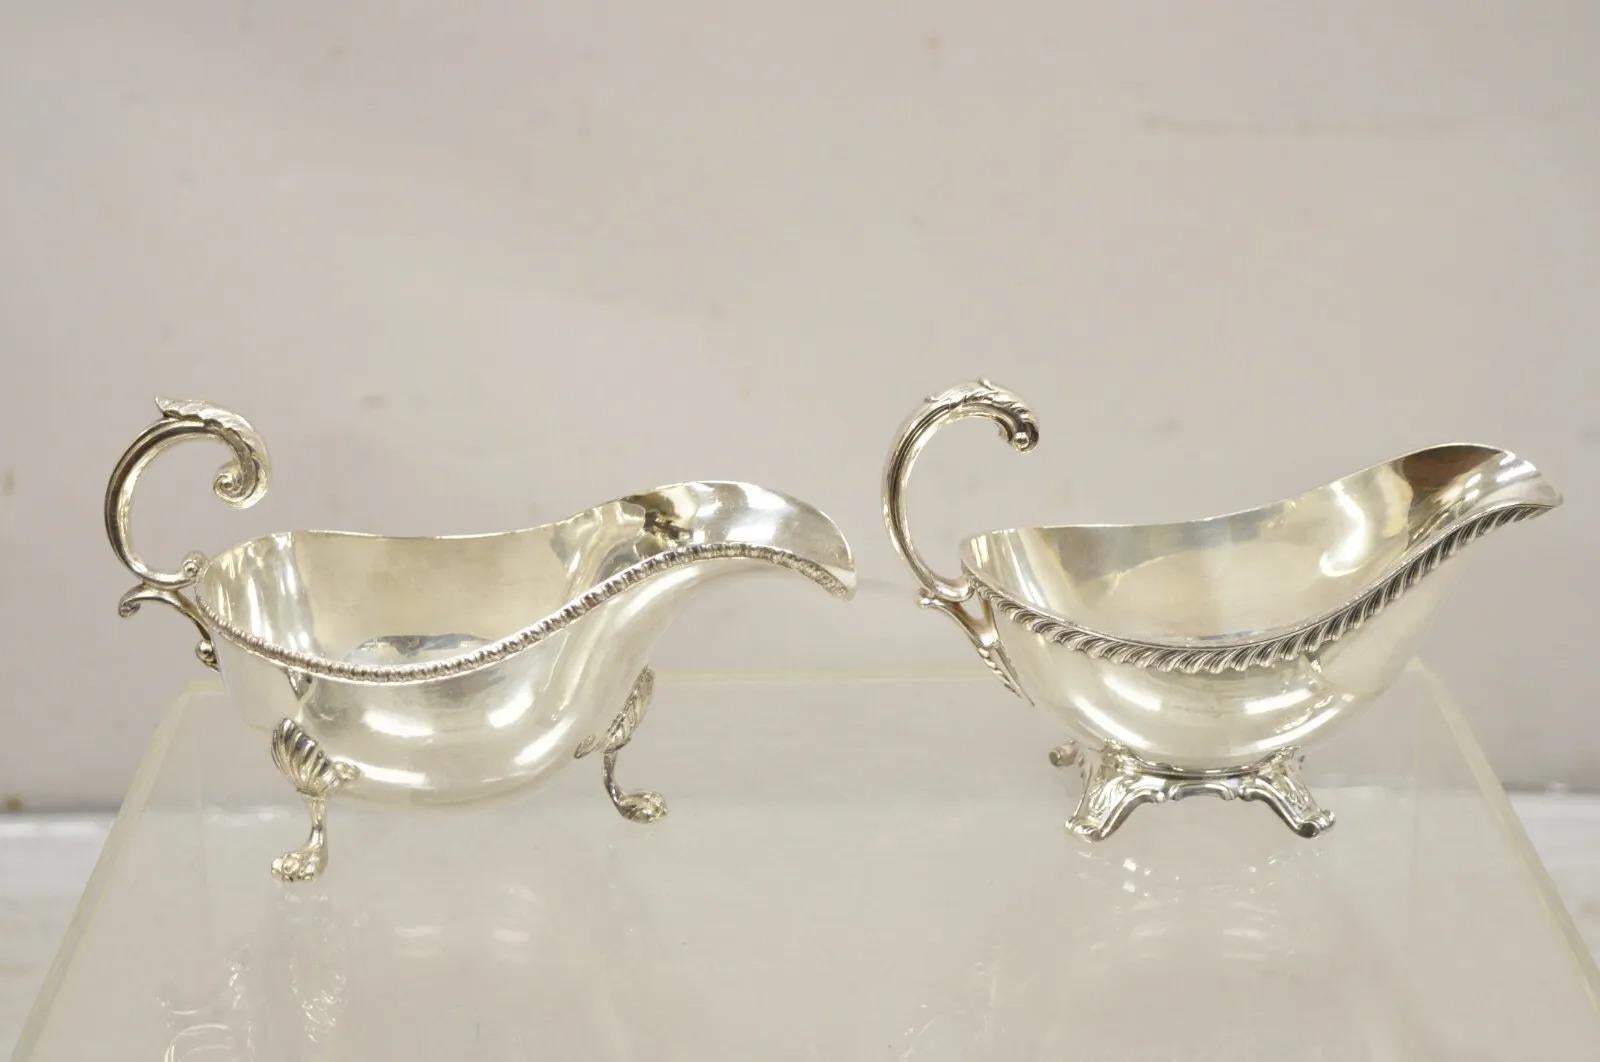 Vintage Silver Plated Victorian Serving Gravy Boat Sauce Boats - Lot of 6 In Good Condition For Sale In Philadelphia, PA